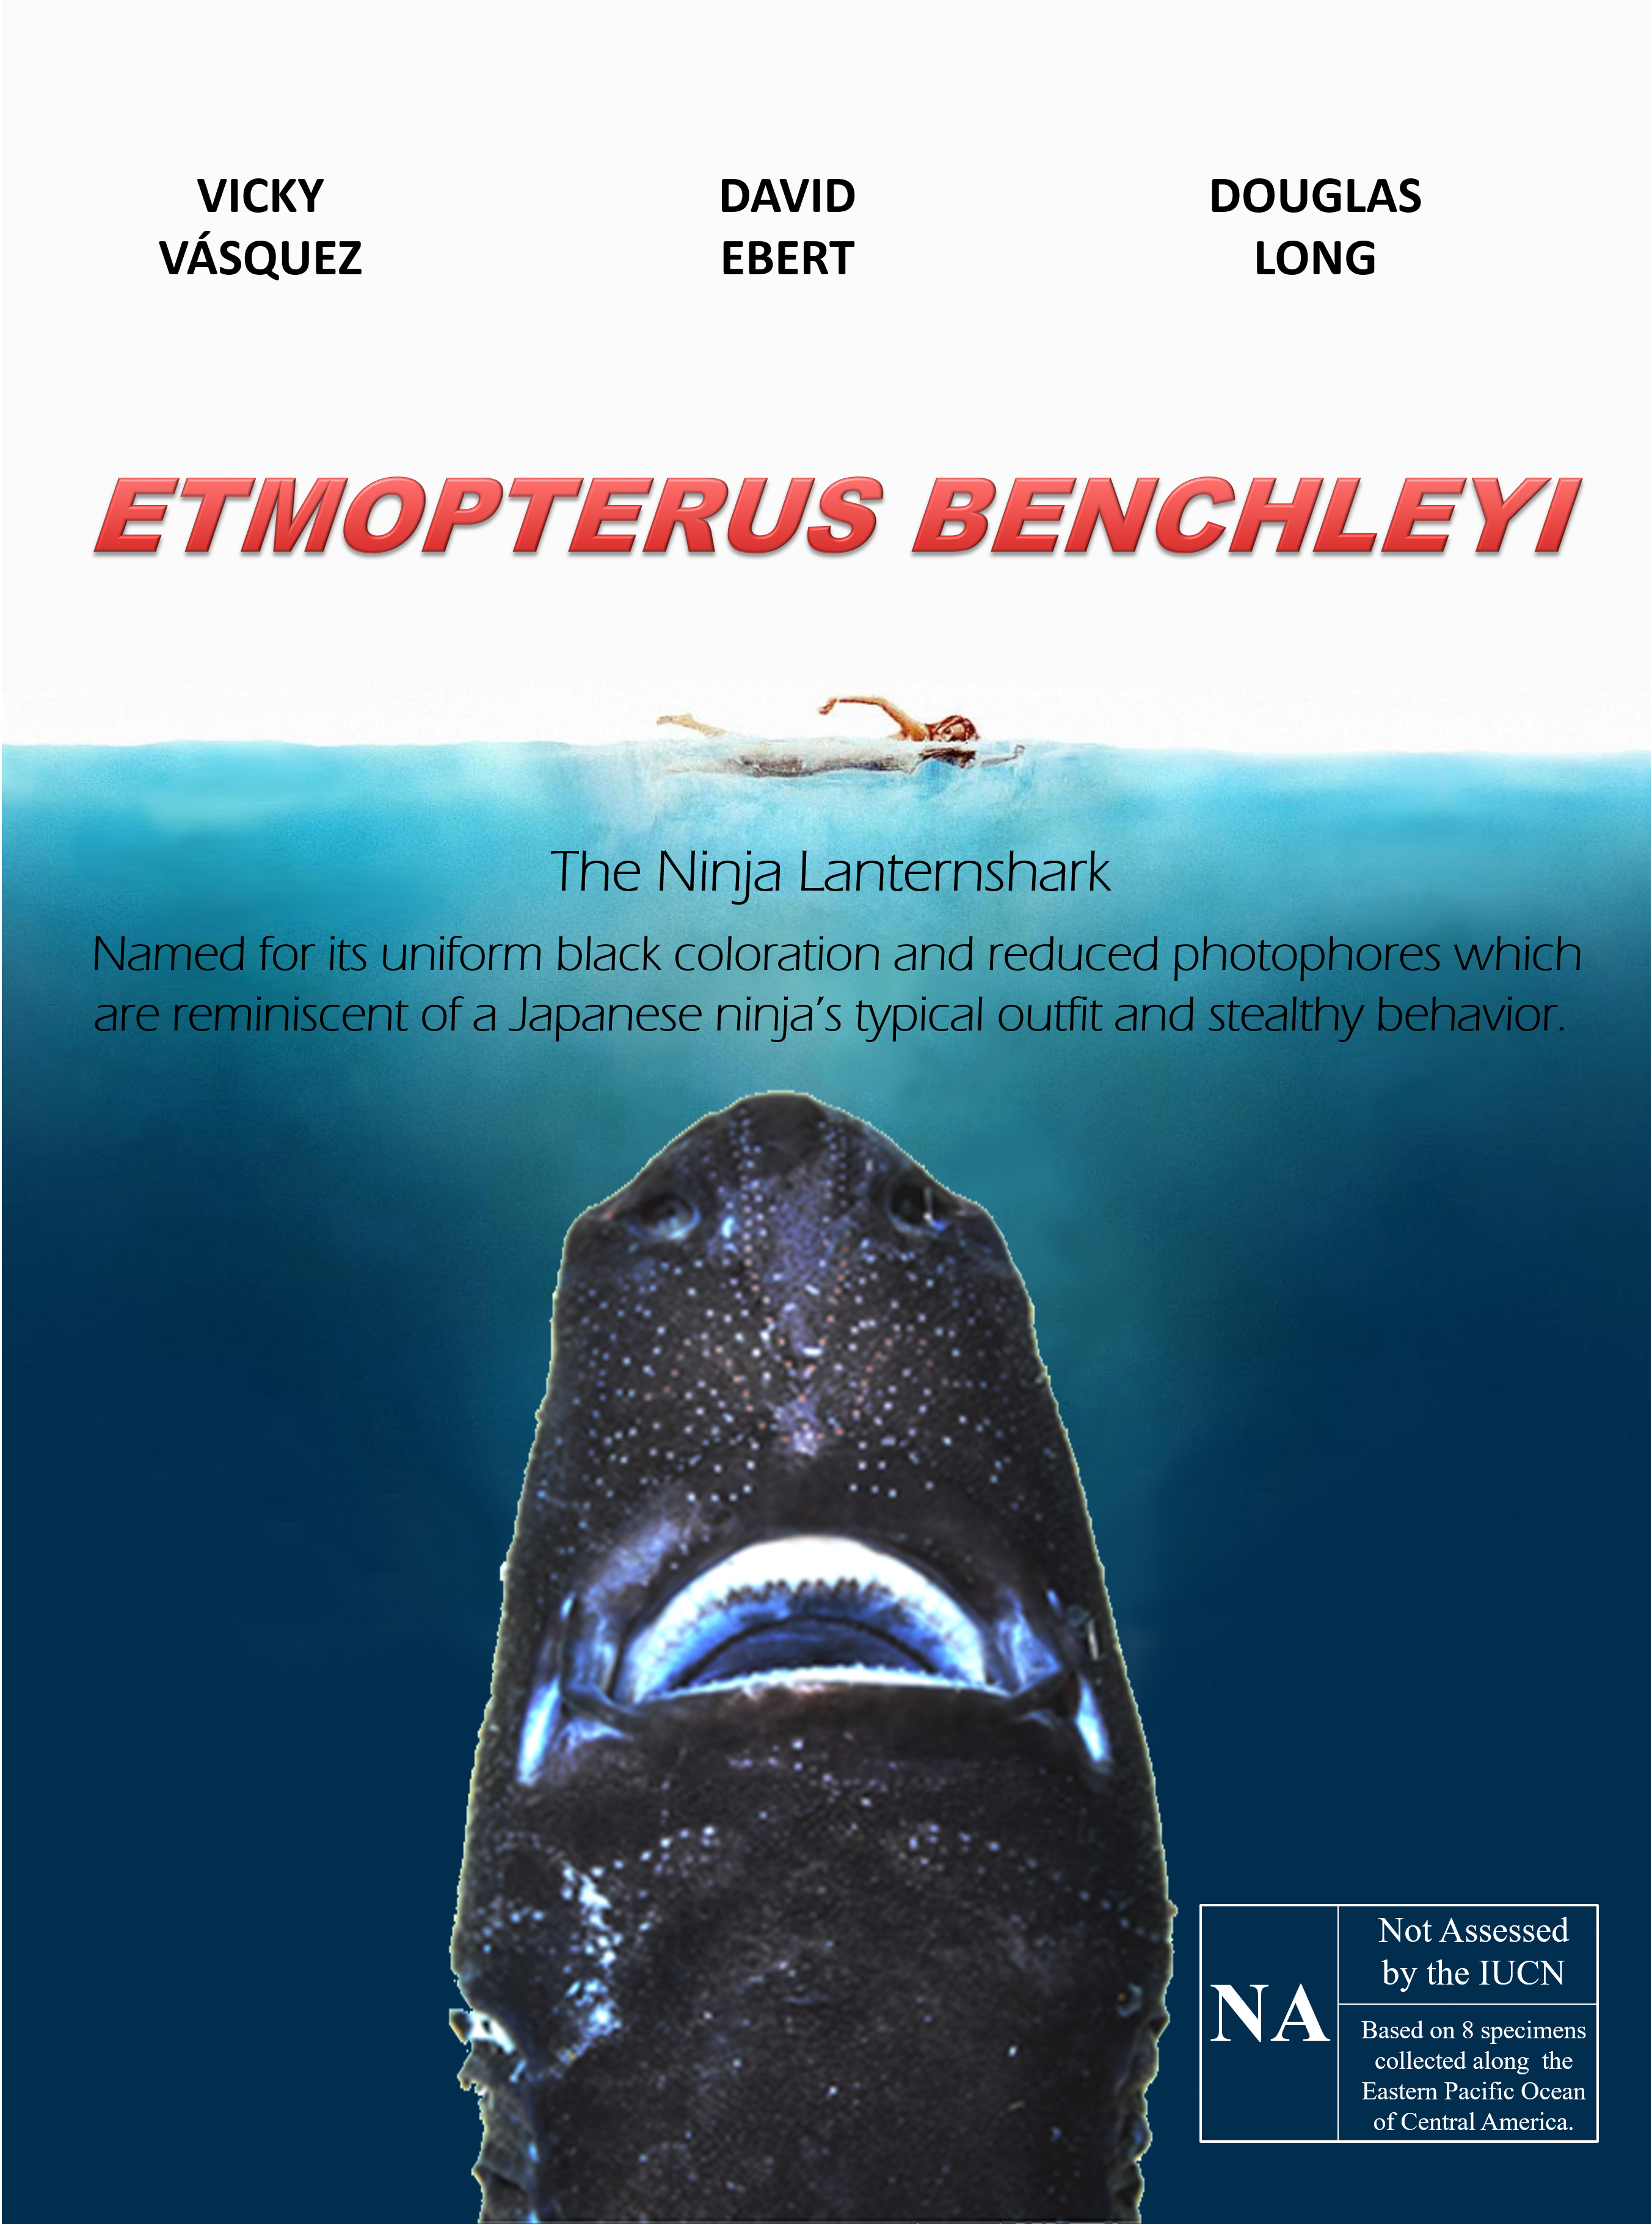 What's in a Name? Part I: The Race to Ninja Lantershark.